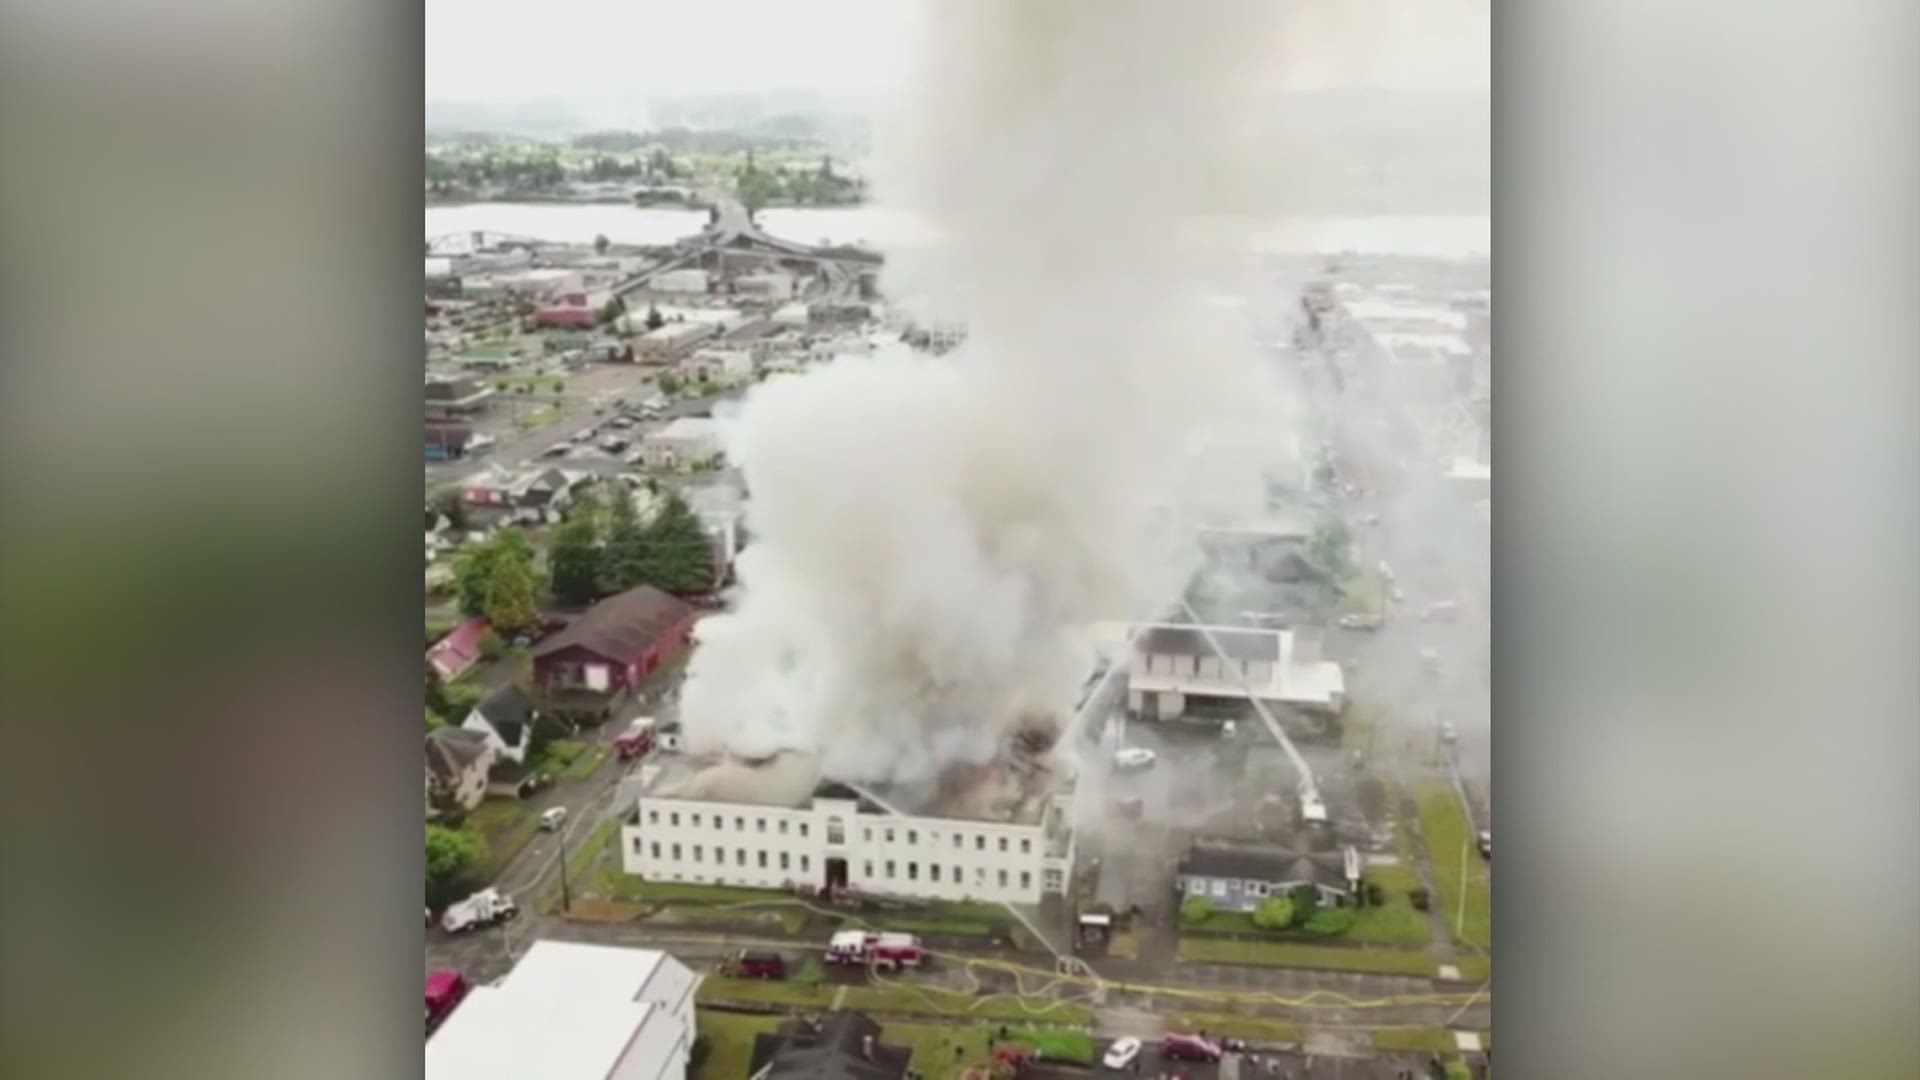 Viewer Eric Timmons captured the devastating fire at the Aberdeen Armory on drone video and shared it with KING 5. (Video by Eric Timmons, Aberdeen, Wash.)